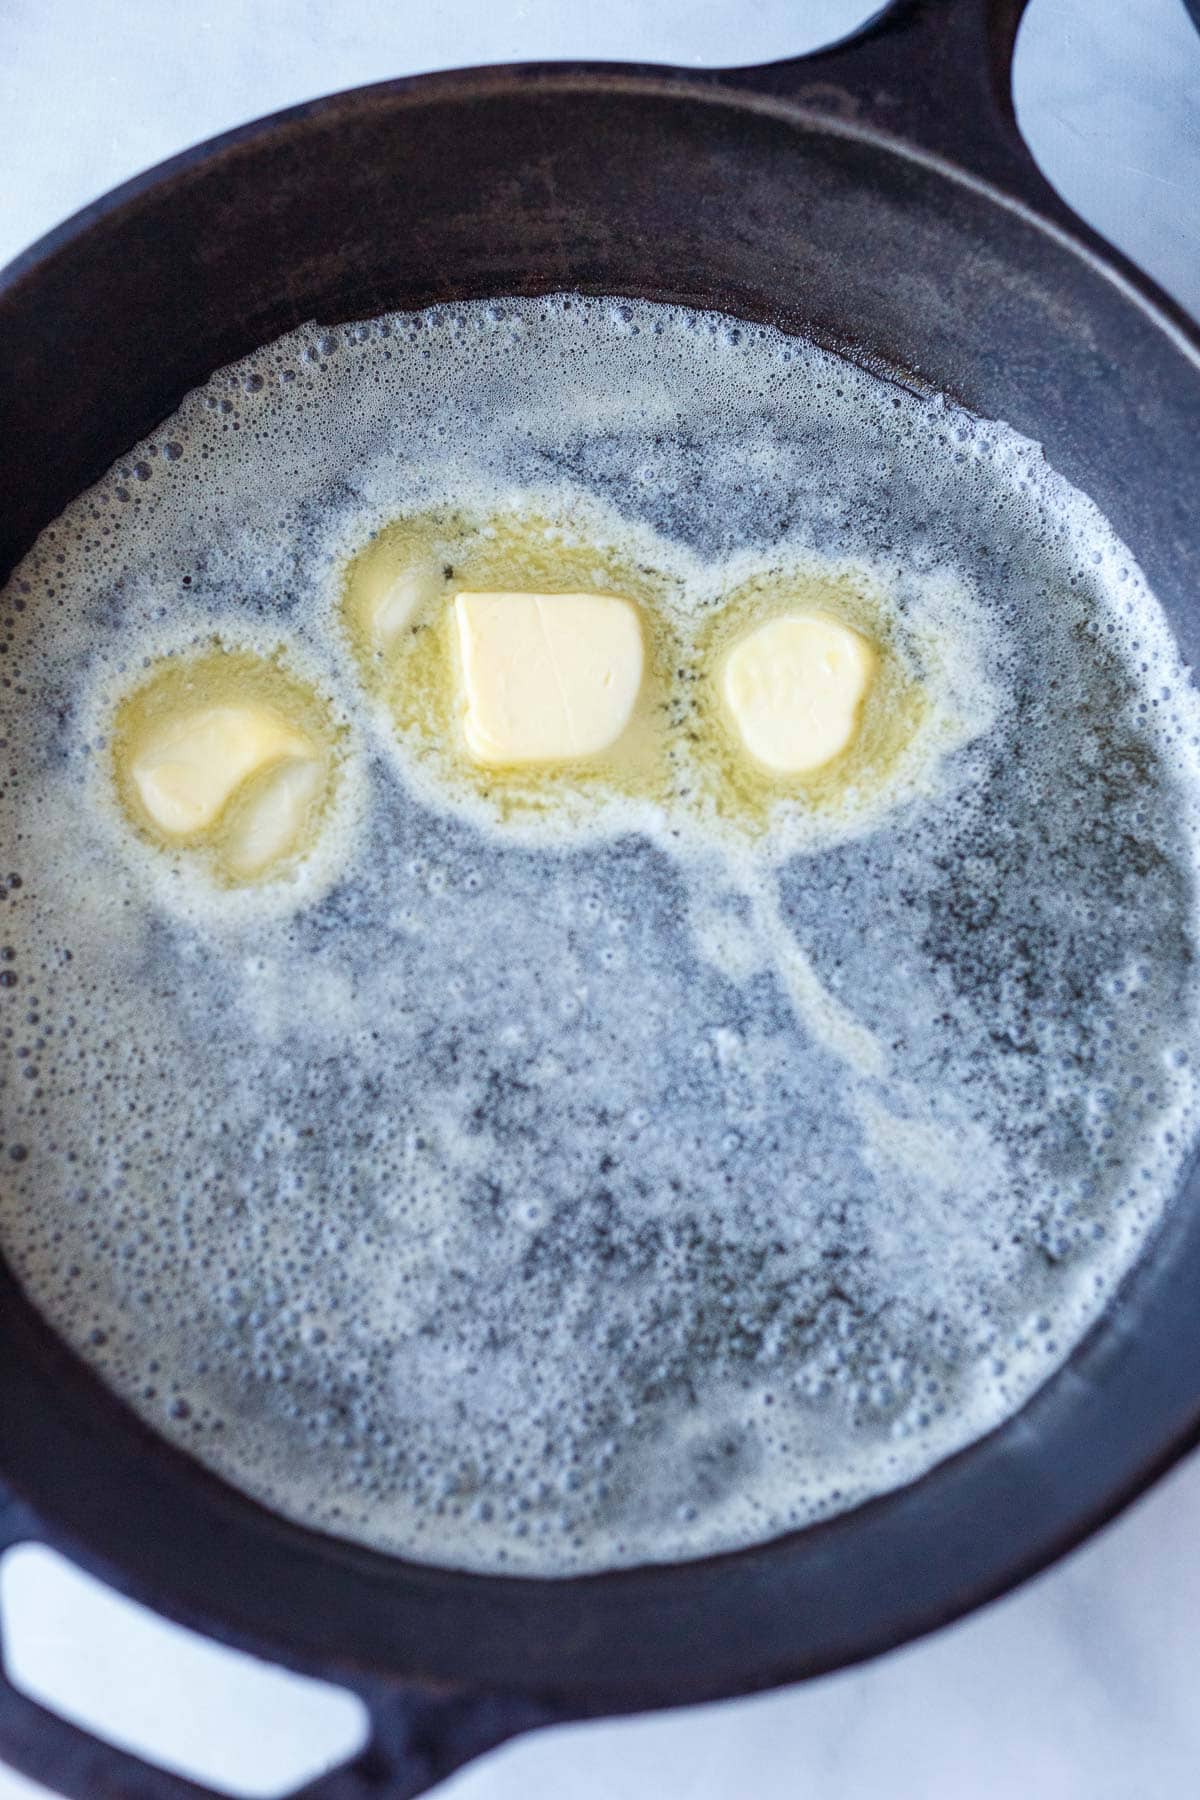 three pats of butter melting and spread out in hot cast iron skillet.